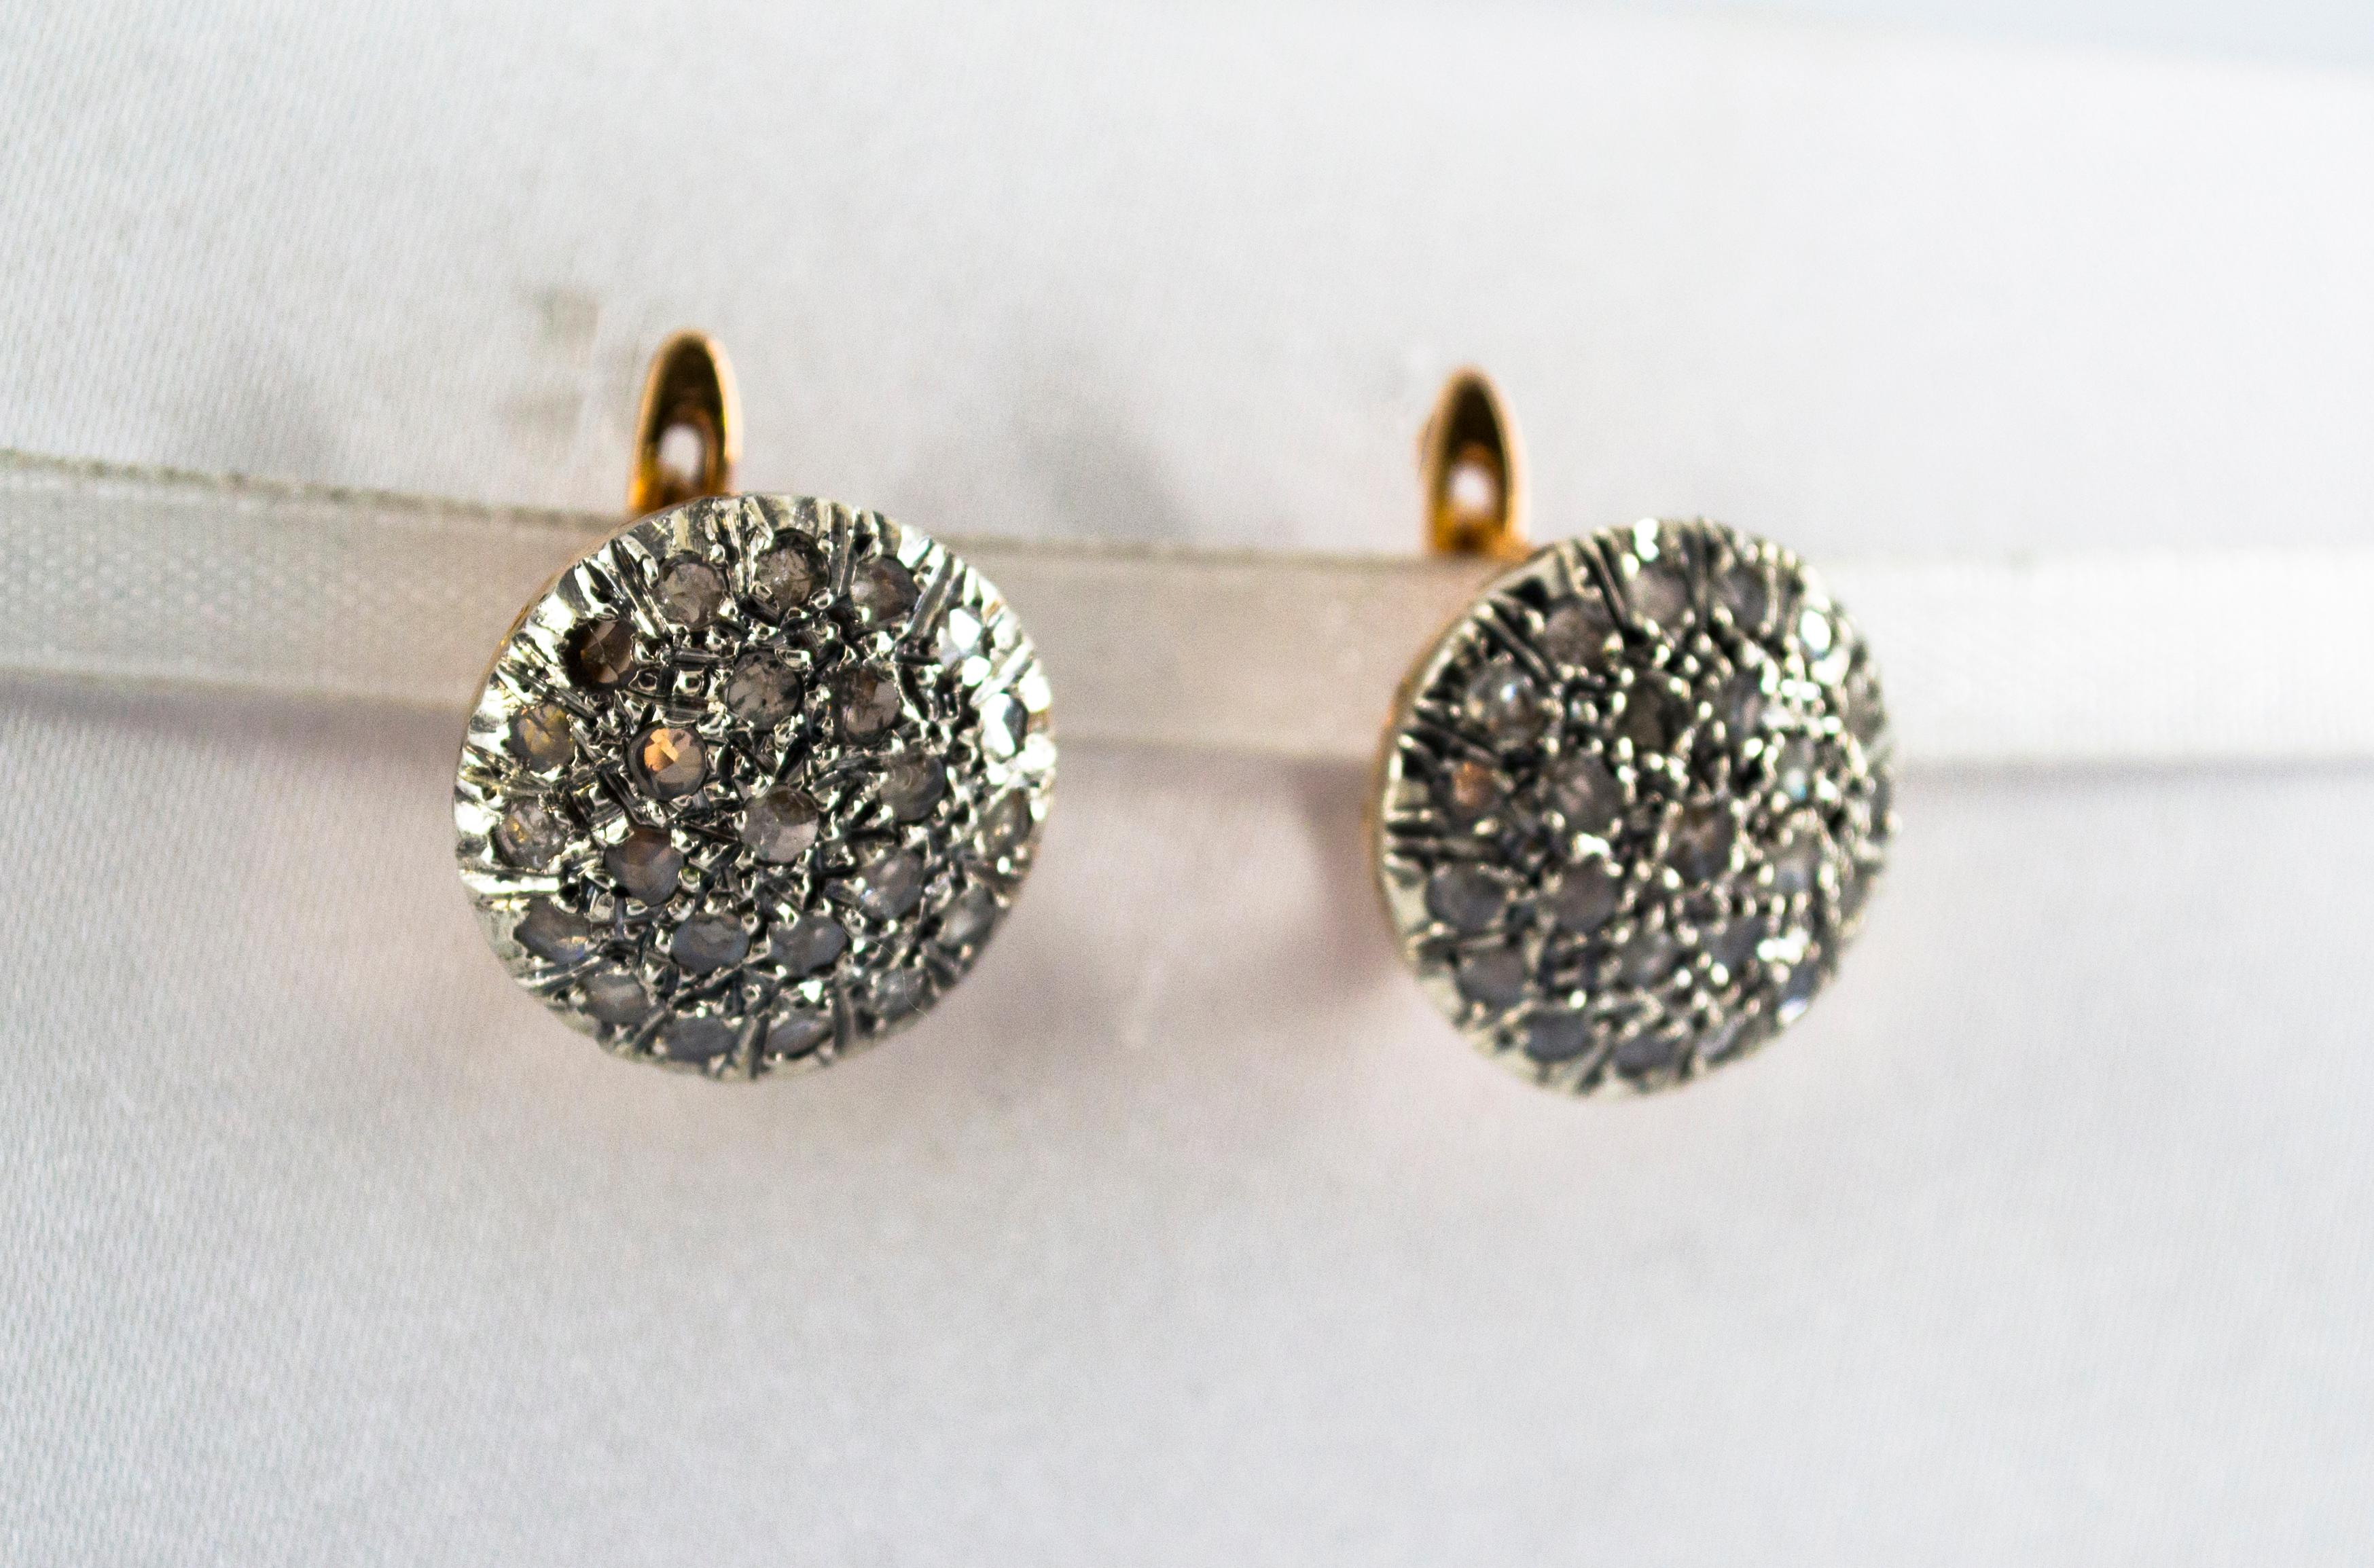 These Earrings are made of 9K Yellow Gold and Sterling Silver.
These Earrings have 1.20 Carats of White Diamonds (Old European Cut and Rose Cut).
These Earrings are inspired by Renaissance Movement.
All our Earrings have pins for pierced ears but we